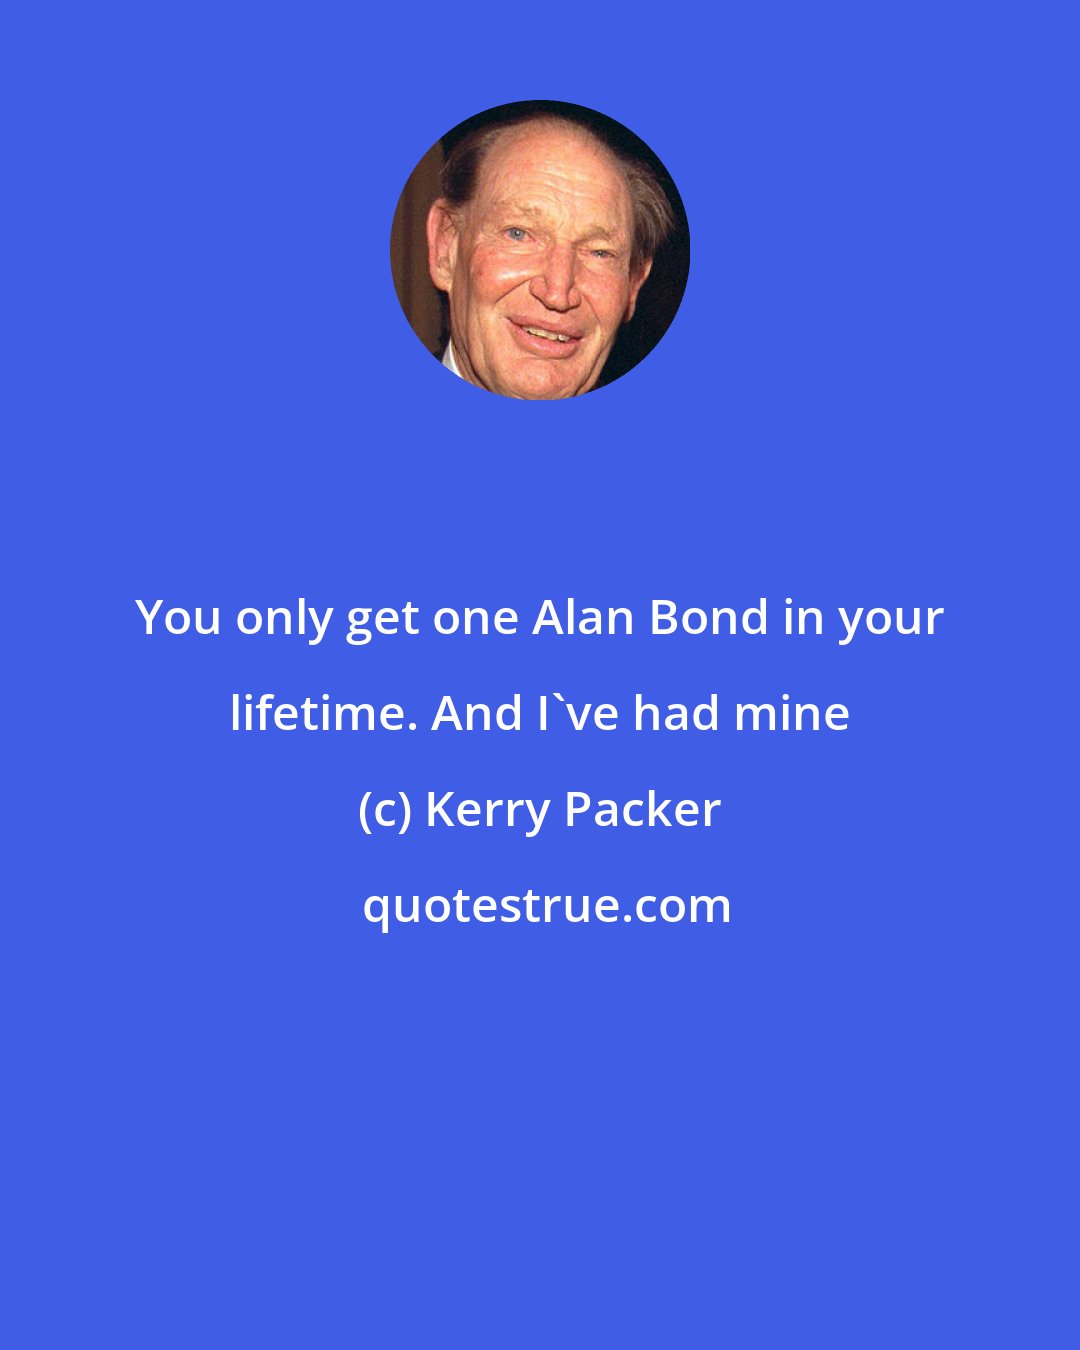 Kerry Packer: You only get one Alan Bond in your lifetime. And I've had mine